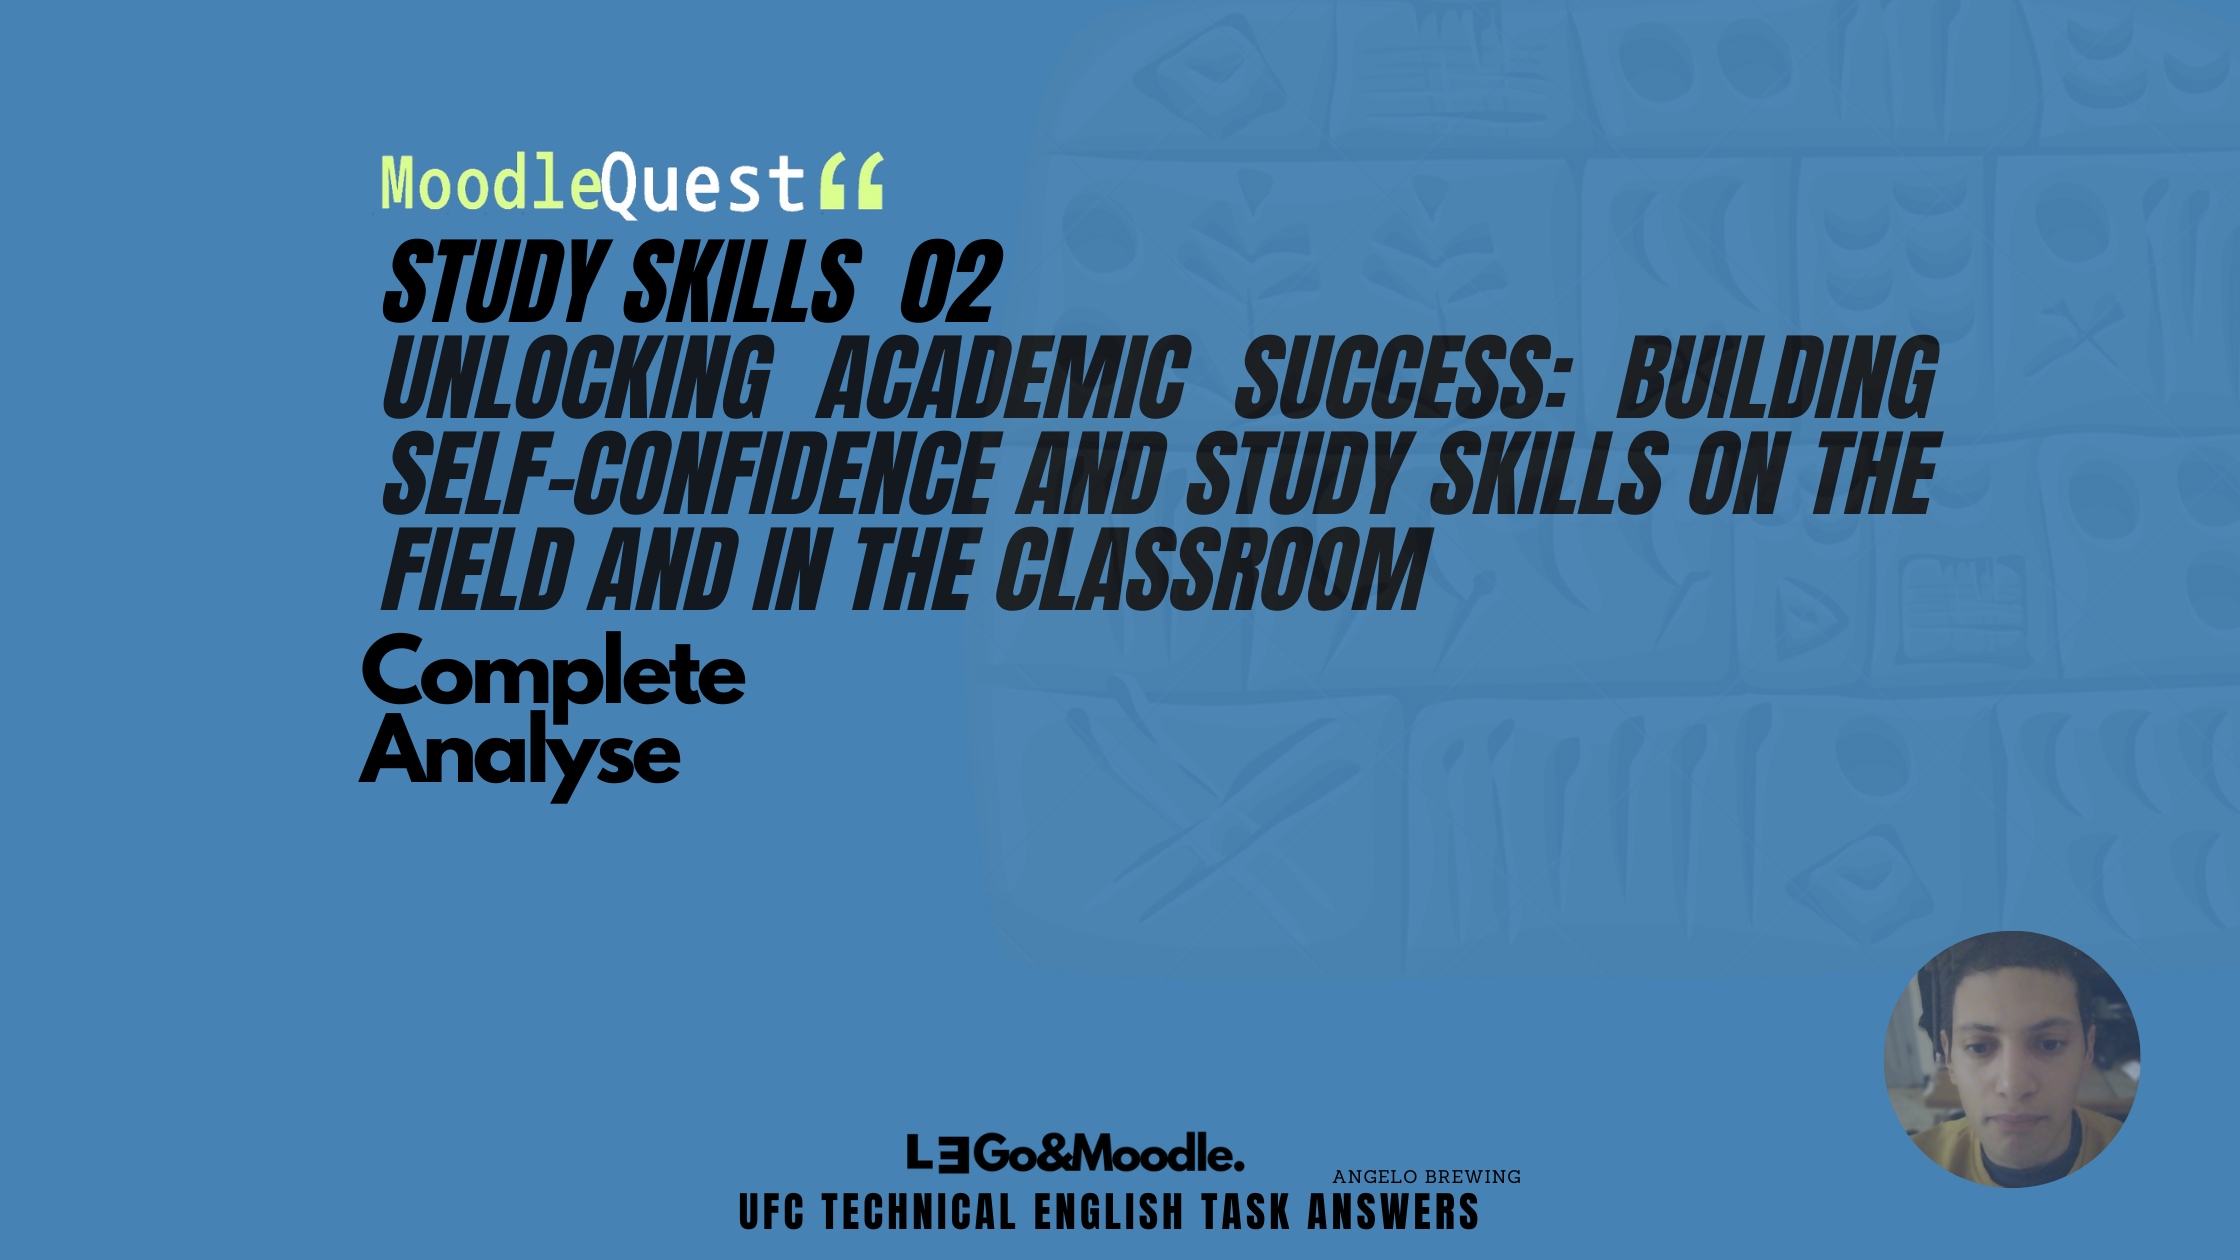 Unlocking Academic Success: Building Self-Confidence and Study Skills on the Field and in the Classroom